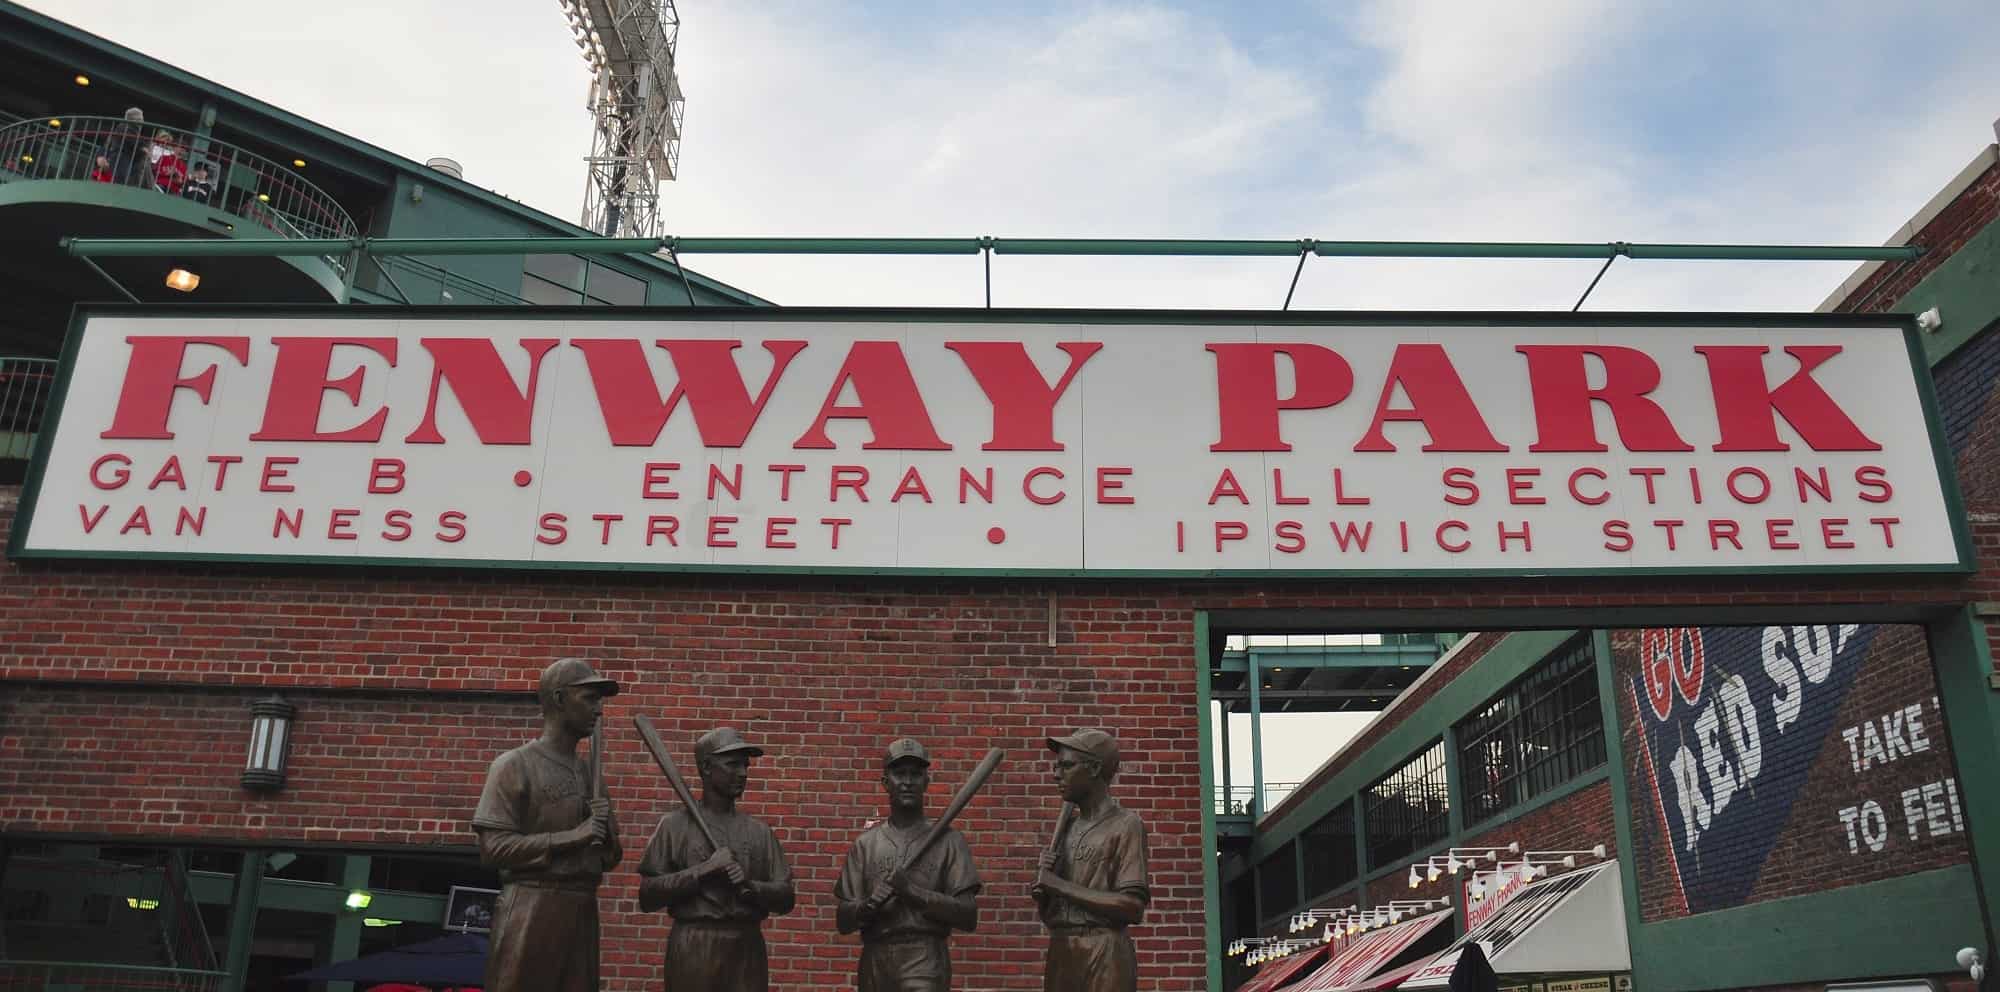 4 Fenway Park Tours  Which Option is Worth It for You?